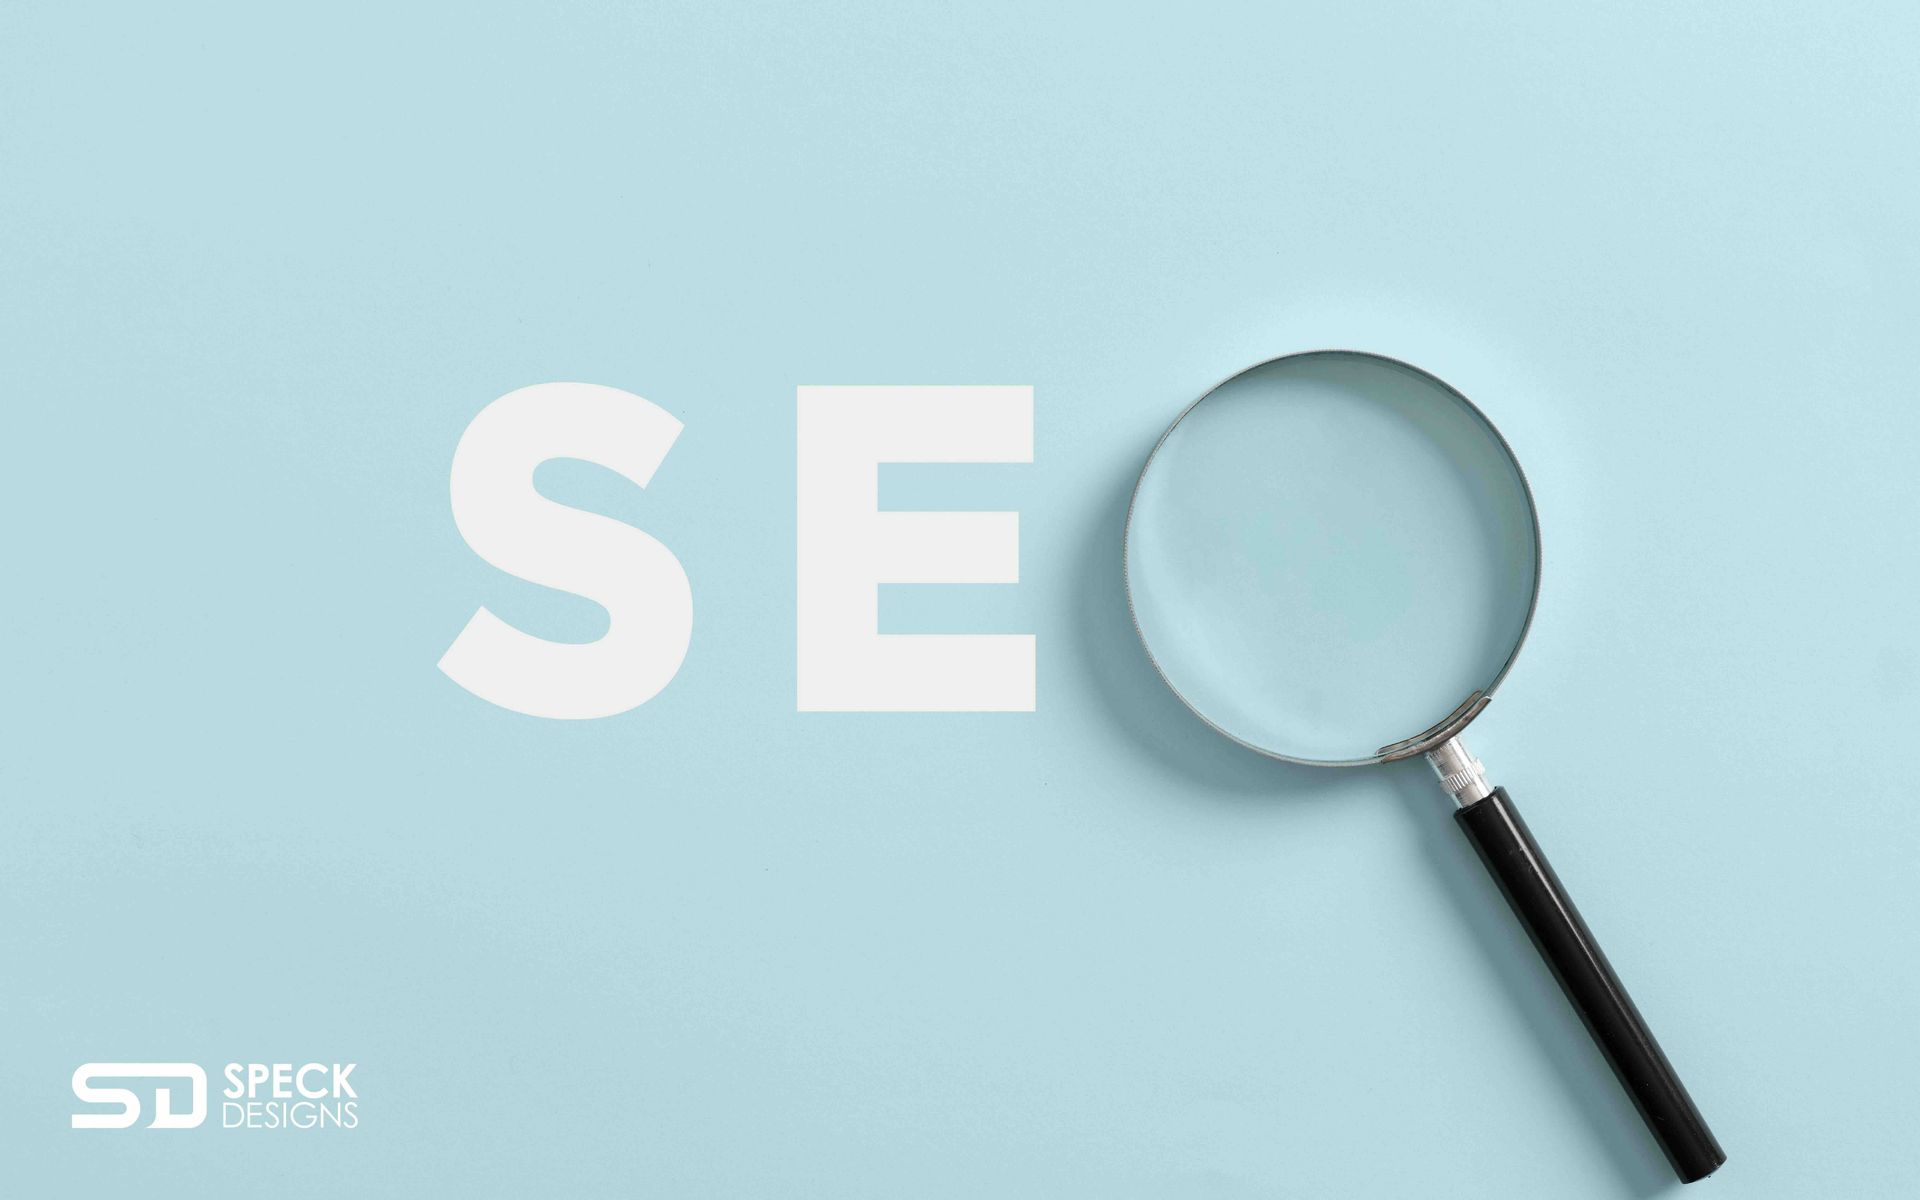 A magnifying glass is looking at the word seo on a blue background.